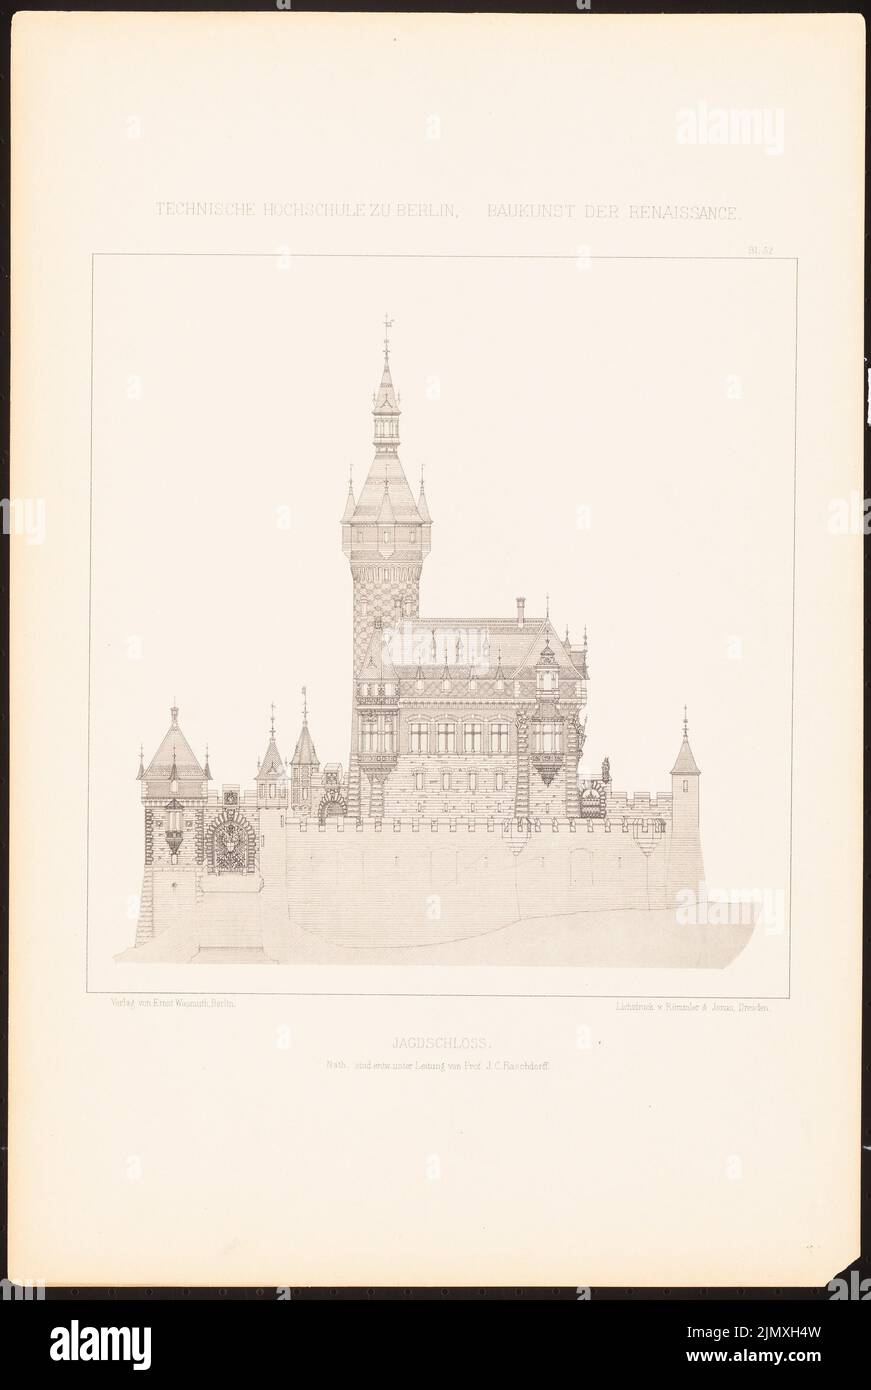 Nath, hunting lodge. (From: J.C. Raschdorff, architecture of the Renaissance, 1881.) (1881-1881): View from the front. Light pressure on paper, 49.1 x 32.9 cm (including scan edges) Stock Photo